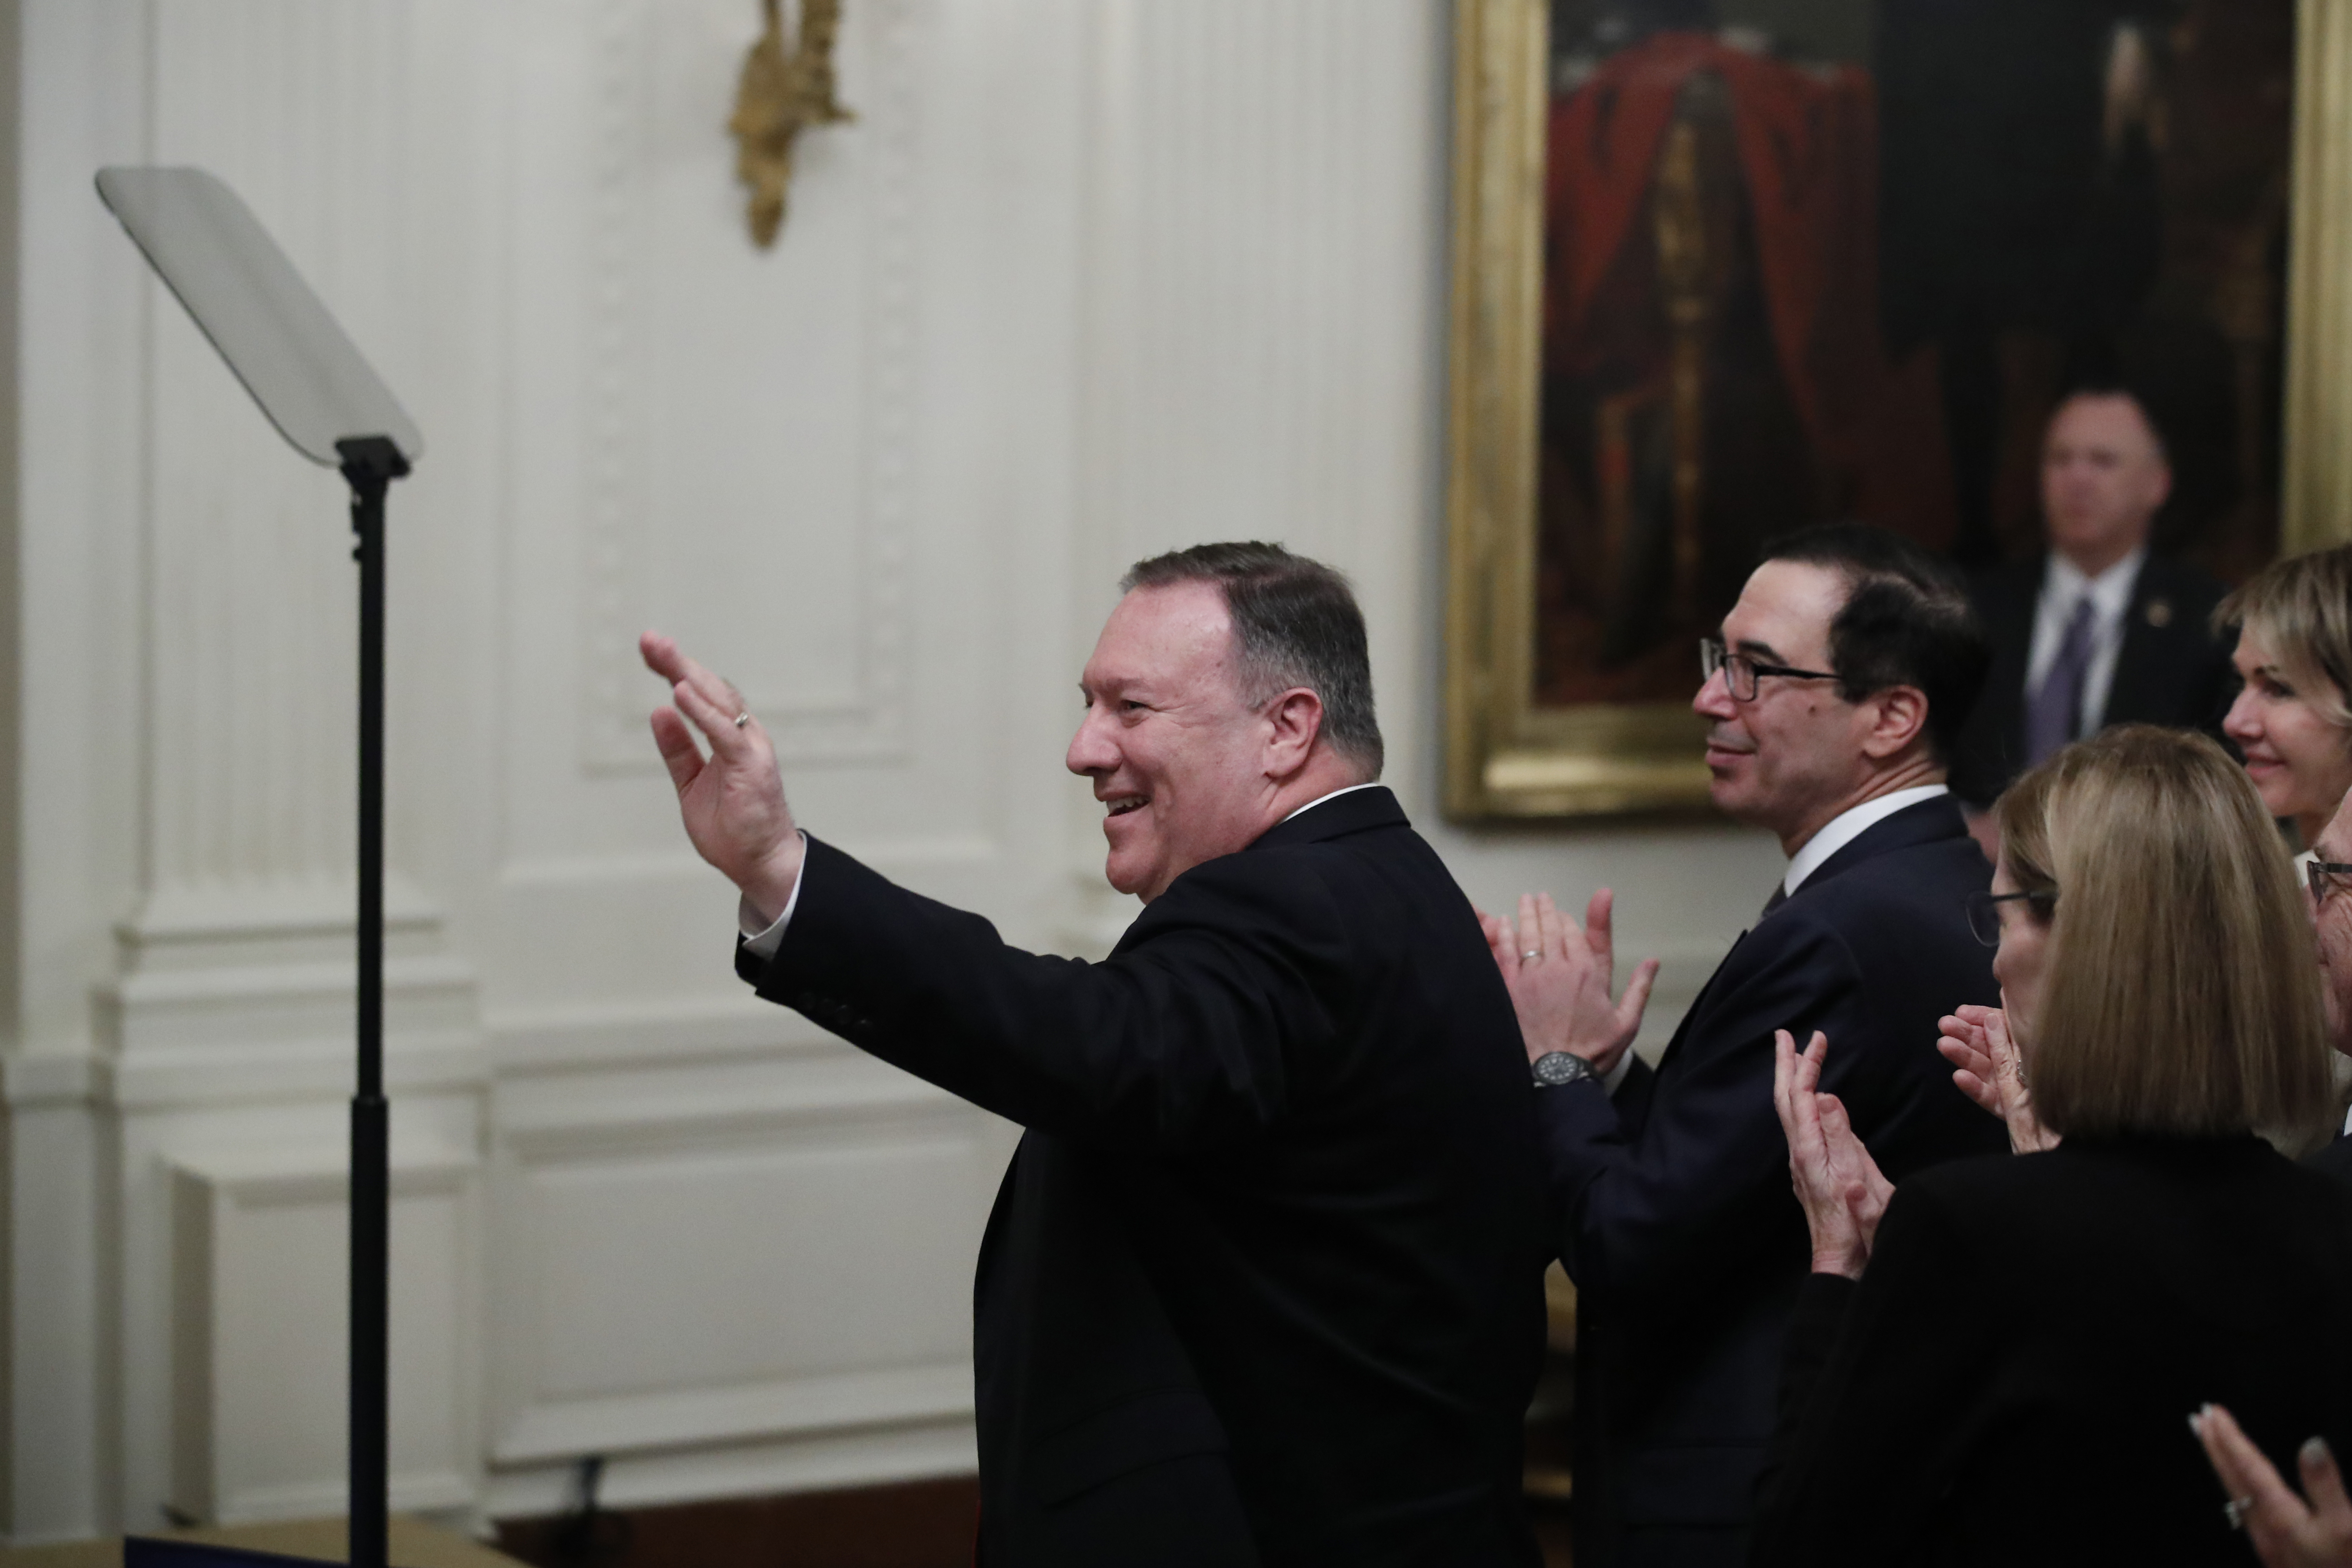 Secretary of State Mike Pompeo, left, joined by Treasury Secretary Steven Mnuchin, waves as he is acknowledged during an event with President Donald Trump and Israeli Prime Minister Benjamin Netanyahu in the East Room of the White House in Washington, Tuesday, Jan. 28, 2020, to announce the Trump administration's much-anticipated plan to resolve the Israeli-Palestinian conflict. (AP Photo/Alex Brandon)(AP Photo/Alex Brandon)